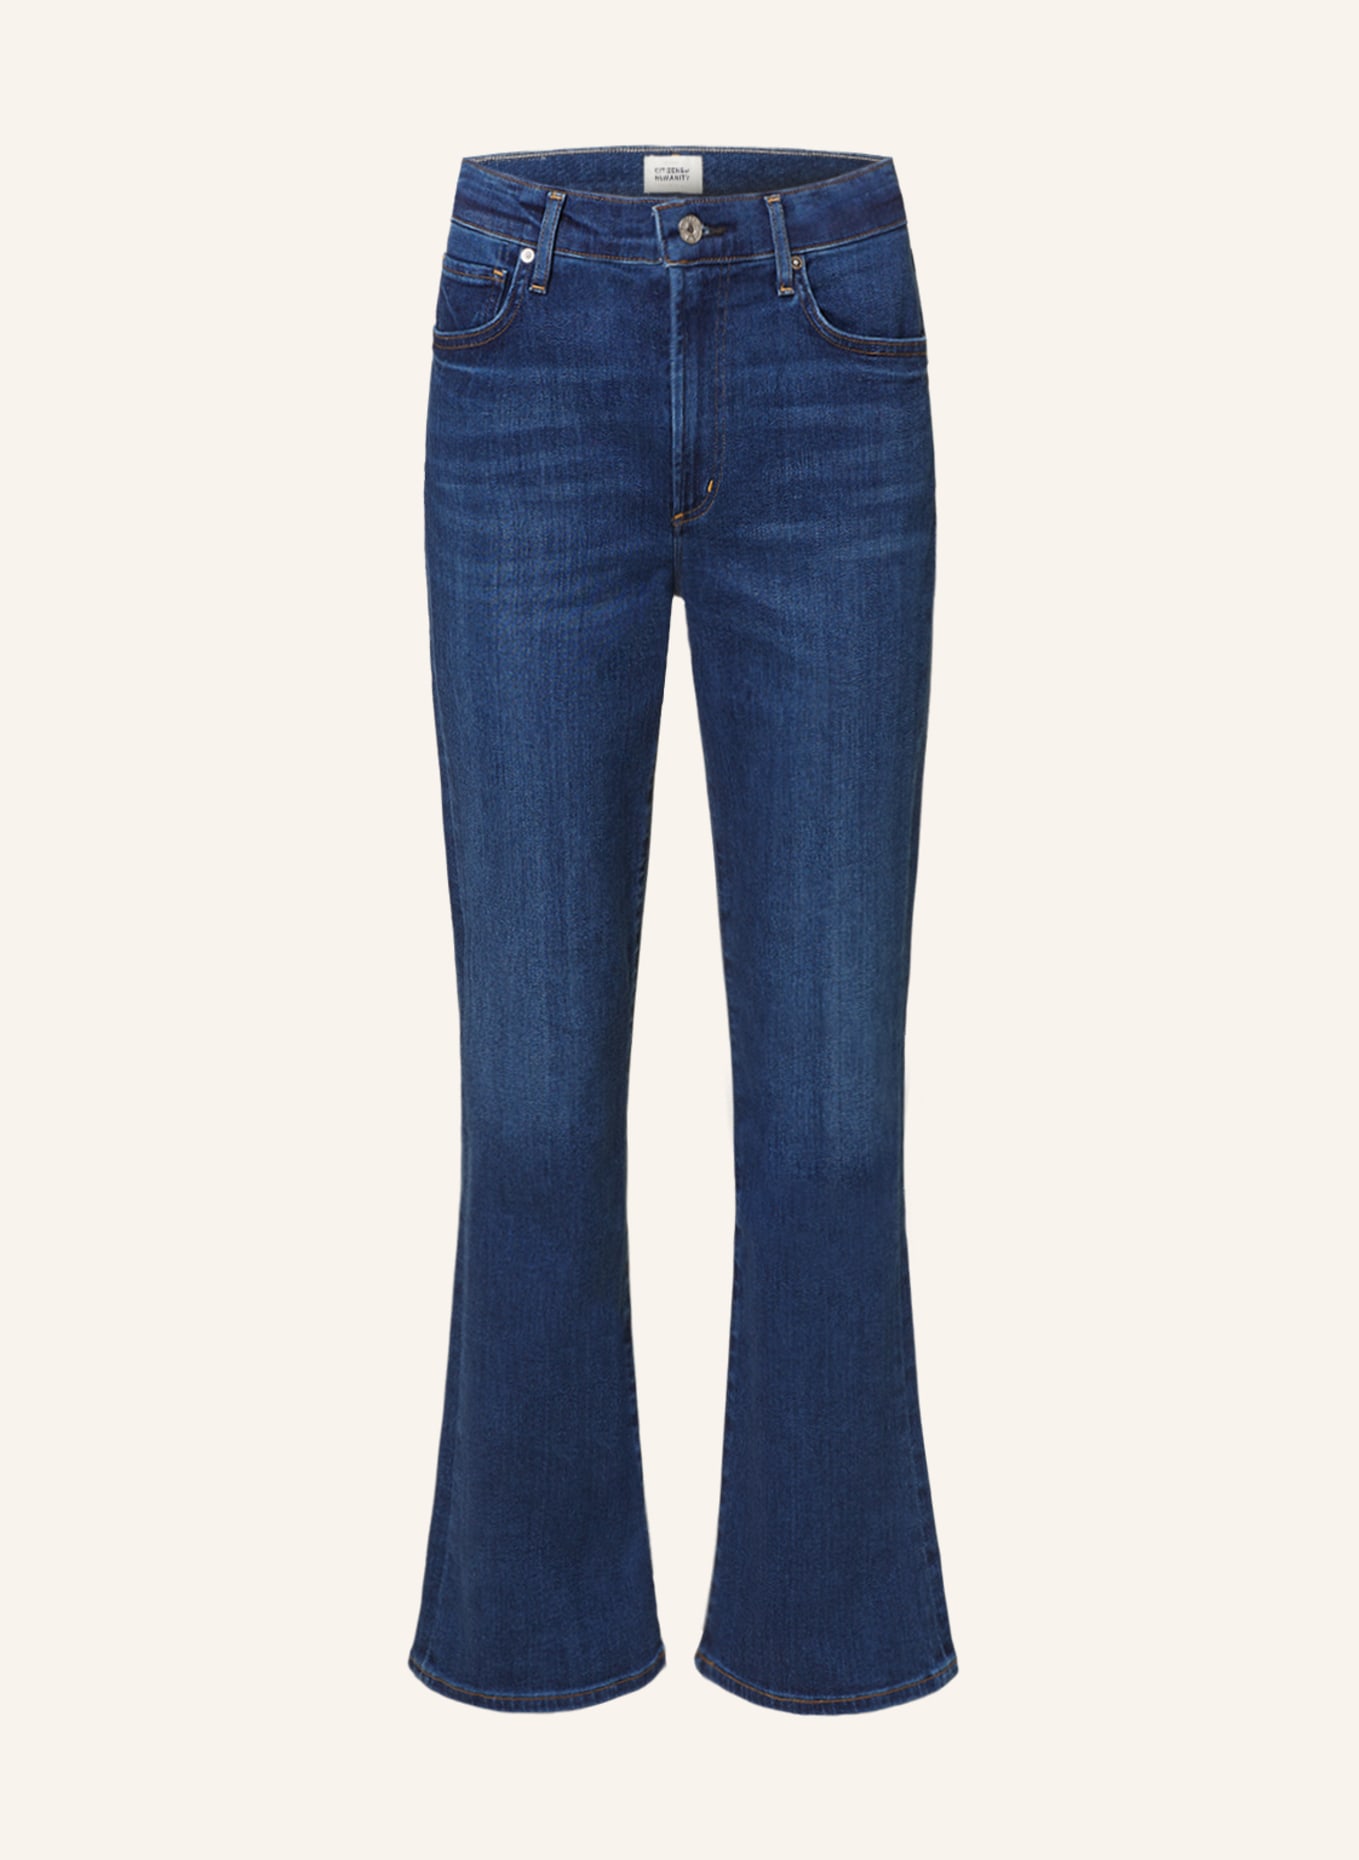 CITIZENS of HUMANITY Bootcut Jeans LILAH, Farbe: PROVANCE DK IND (Bild 1)